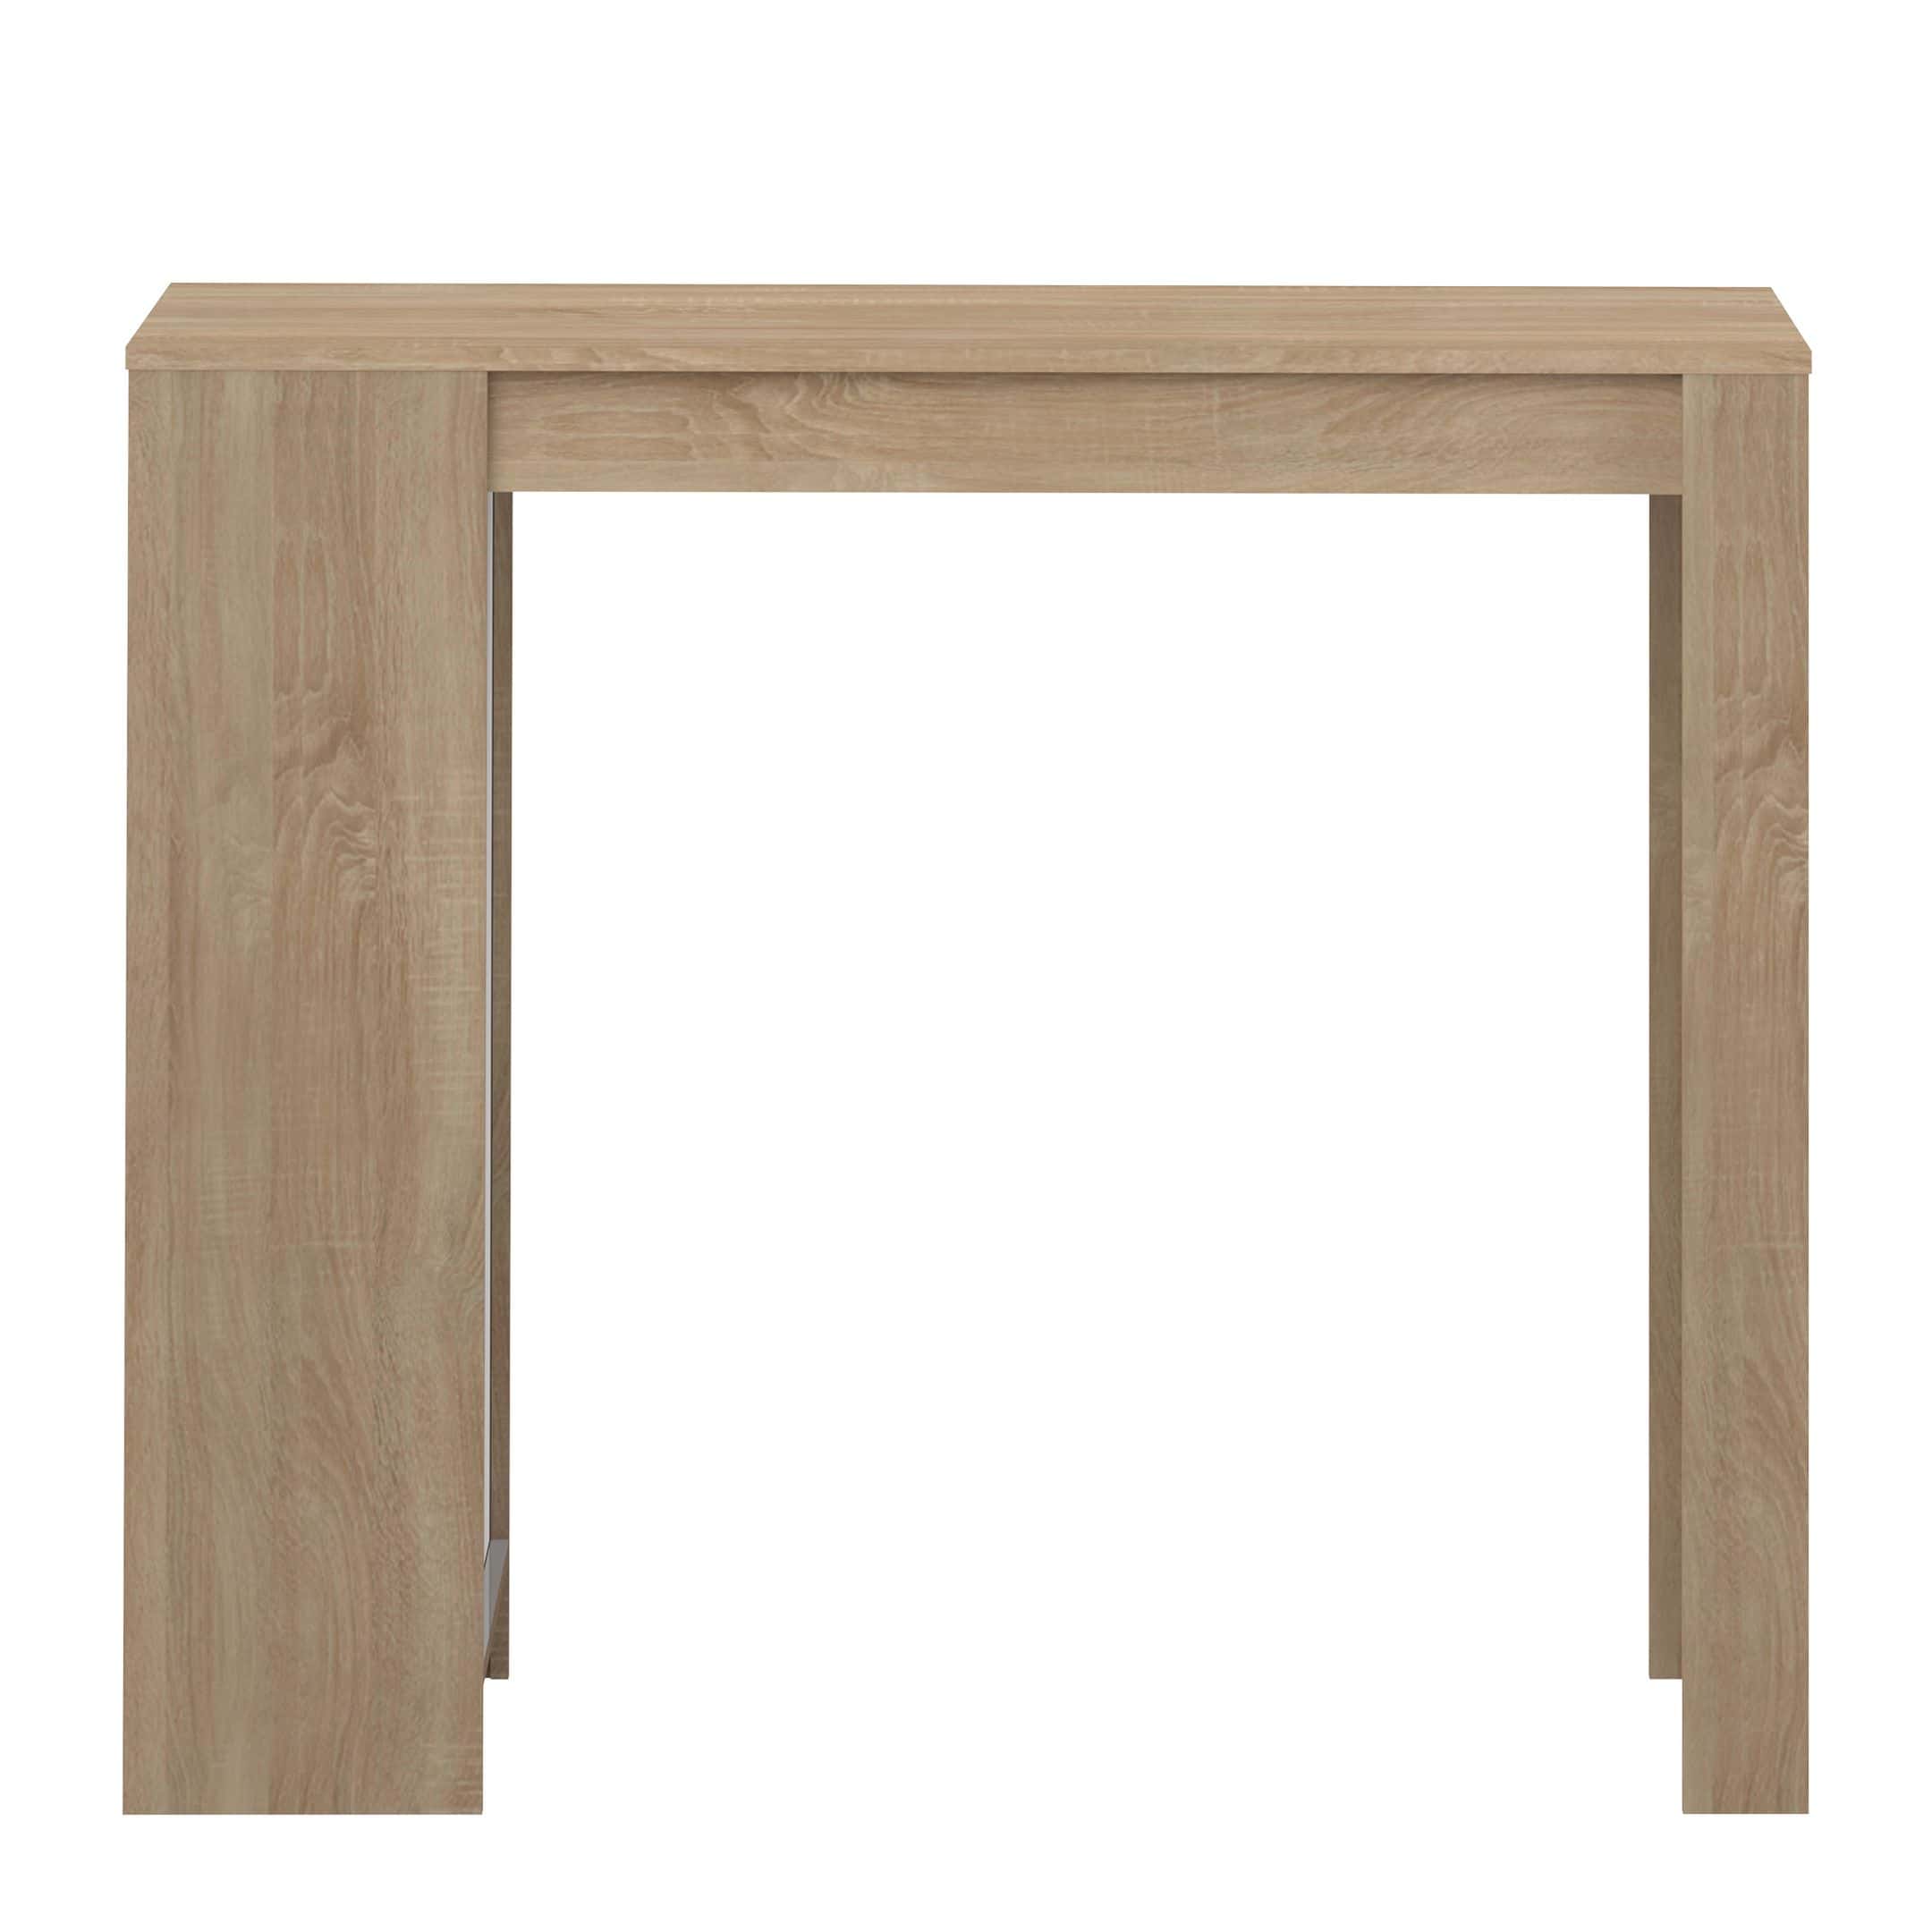 Aravis Dining Bar Table Natural Oak by Temahome